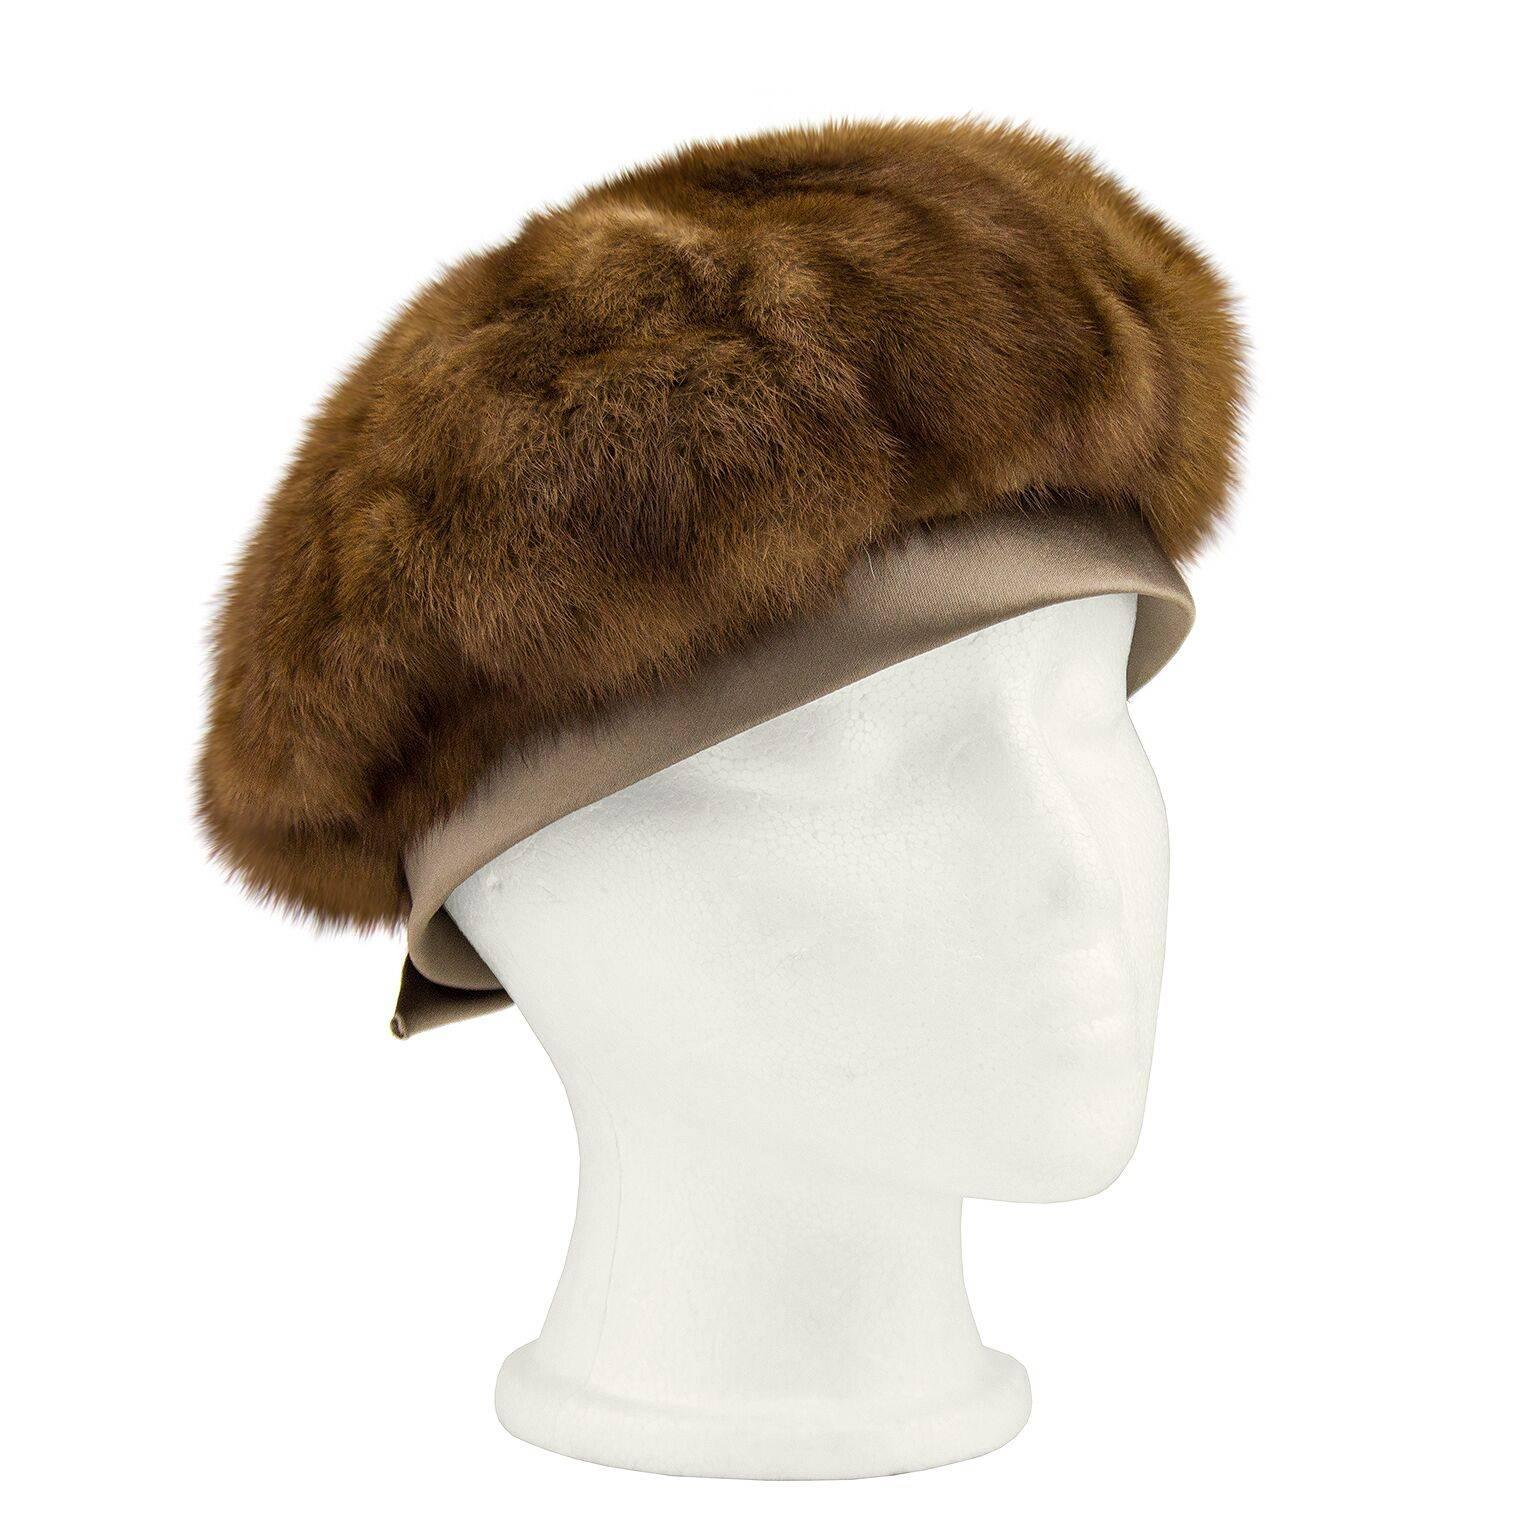 1960s mink beret from a Toronto based designer. Taupe silk ribbon detail around the perimeter with a bow detail at the back. Excellent vintage condition, the mink has been preserved extremely well. Very wearable and perfect to kick up your winter